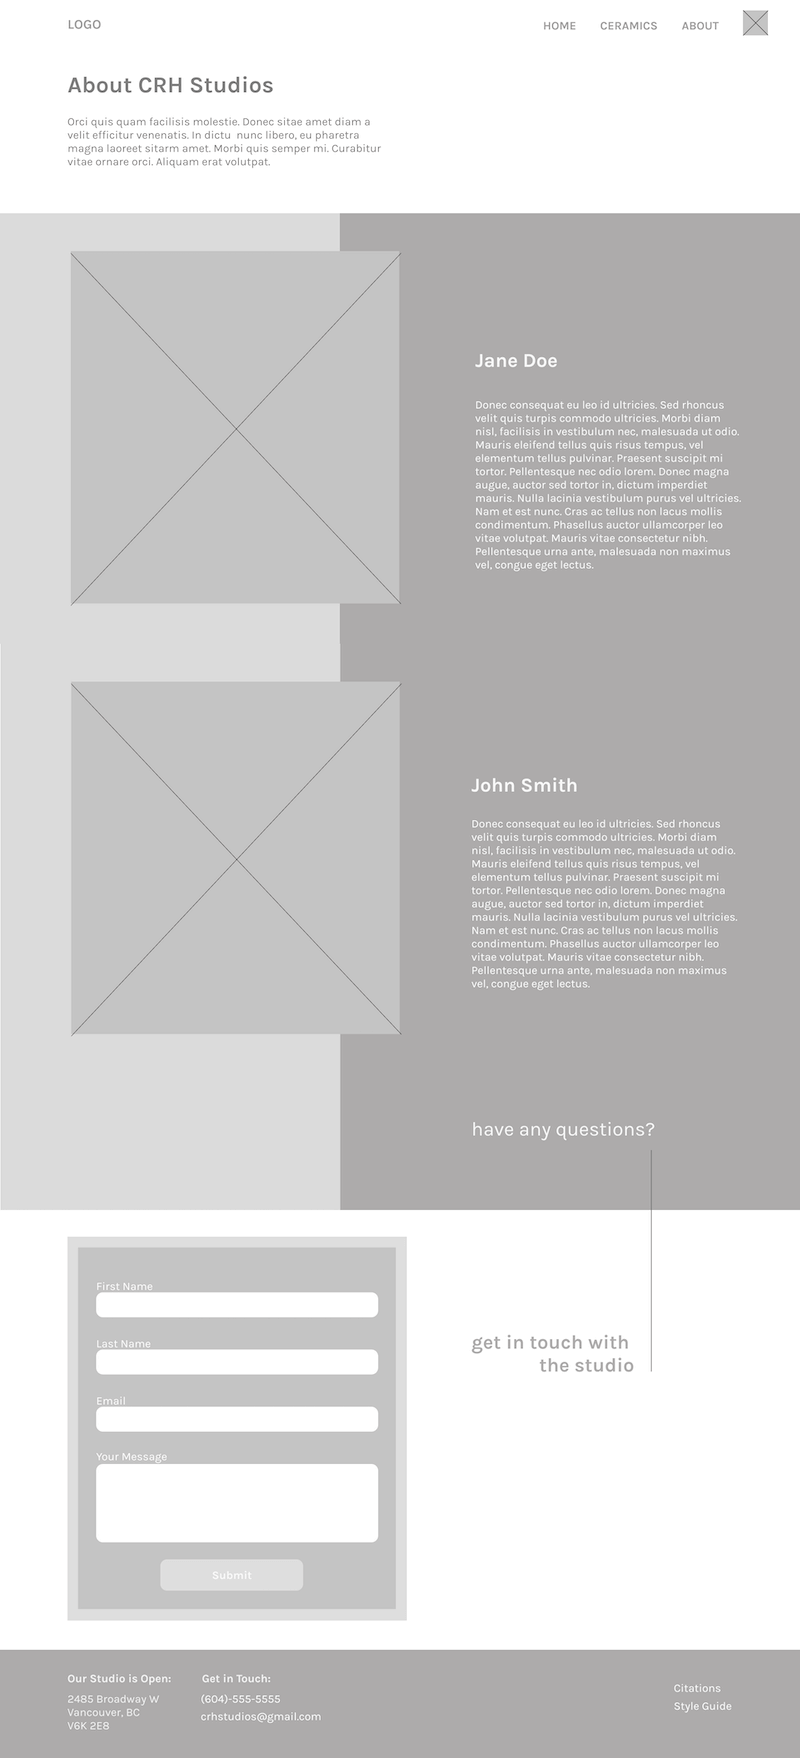 Wireframes for desktop about page of CRH Studios.